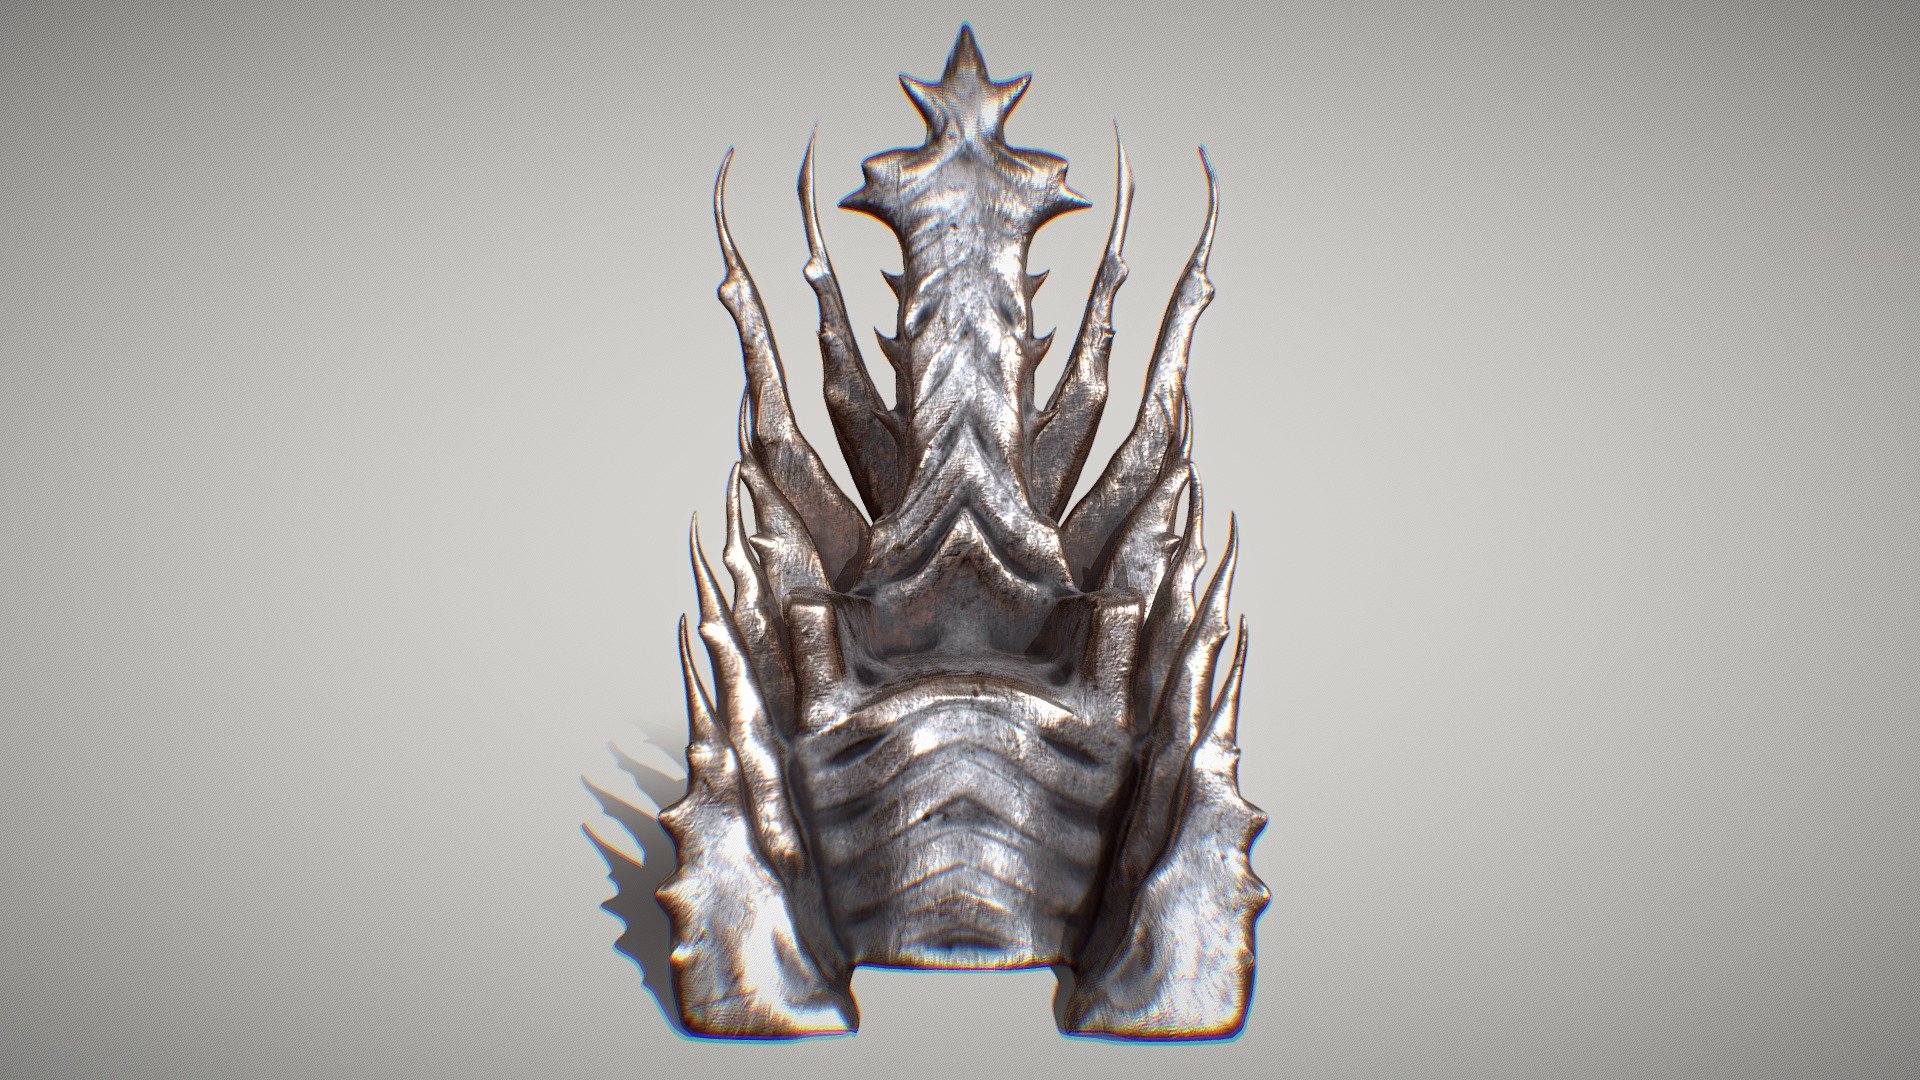 4K PBR Materials

Scaled to human size

Iron &amp; Stone Throne - https://skfb.ly/ovvIq
Sol Throne - https://skfb.ly/oAyX6 - Alien Throne (Metal) - Buy Royalty Free 3D model by bossdeff 3d model